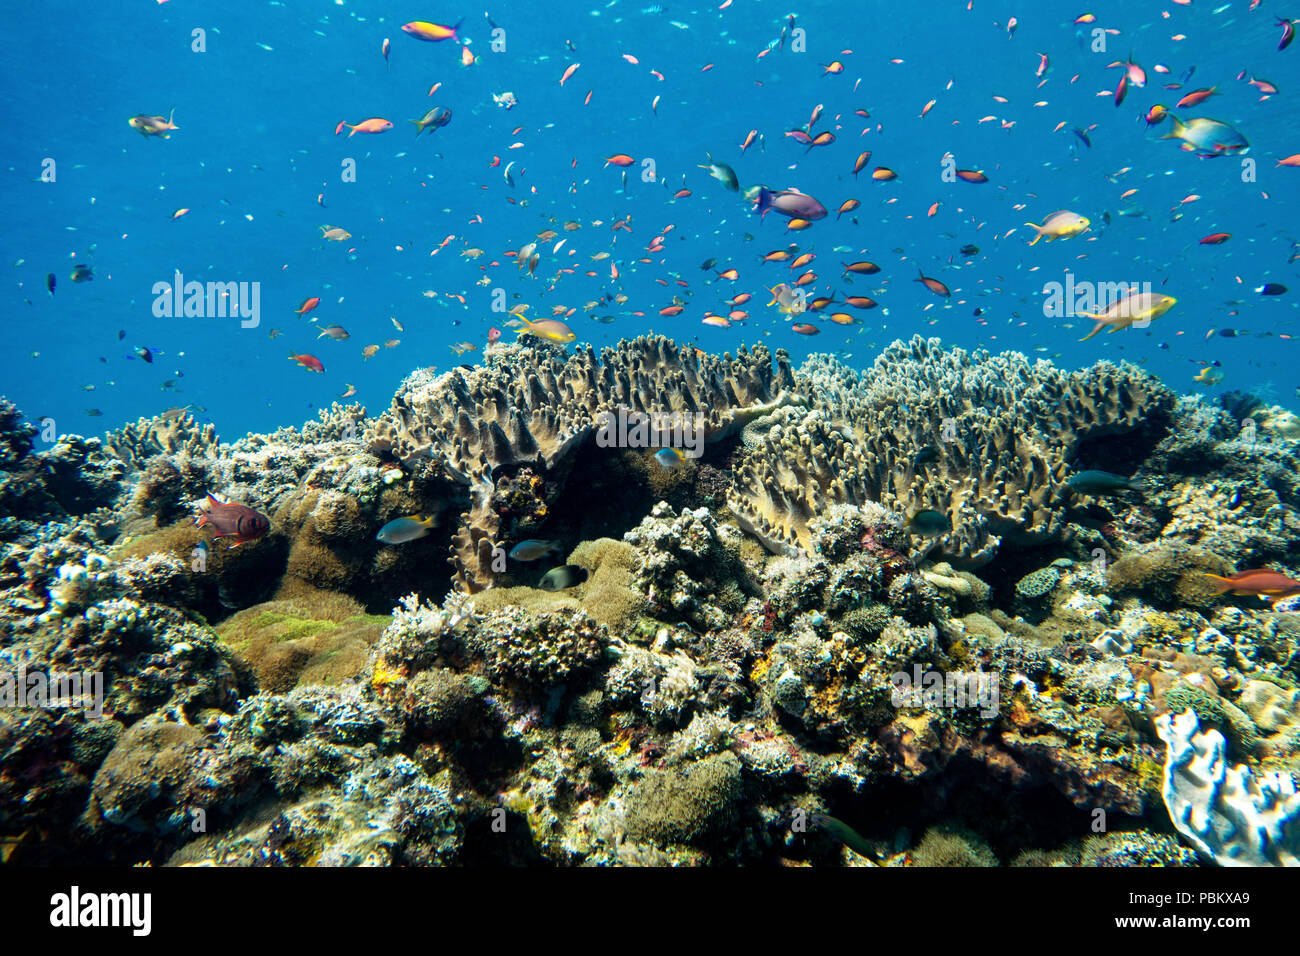 A coral reef full of fish in indonesia Stock Photo